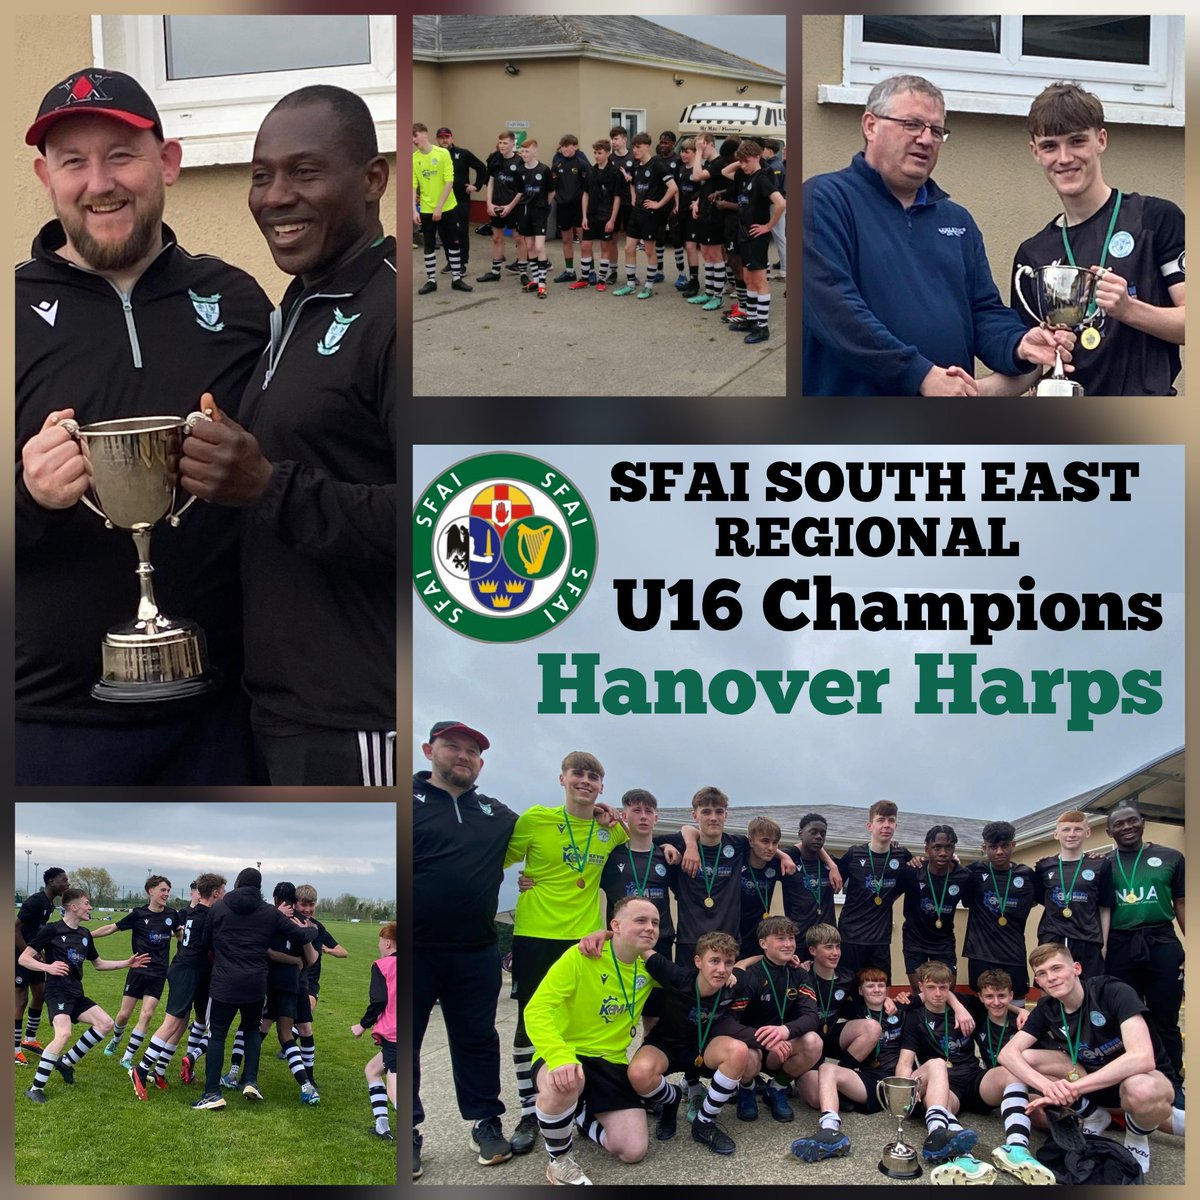 Its not often we get to celebrate a SFAI Cup success so as the dust settles on another fantastic day for the club we salute our u16s. @FAICarlow @Natsport @Pres_Carlow @ActiveCarlow @GrassrootsTTB @Strikeronline1 @Carlow_Co_Co